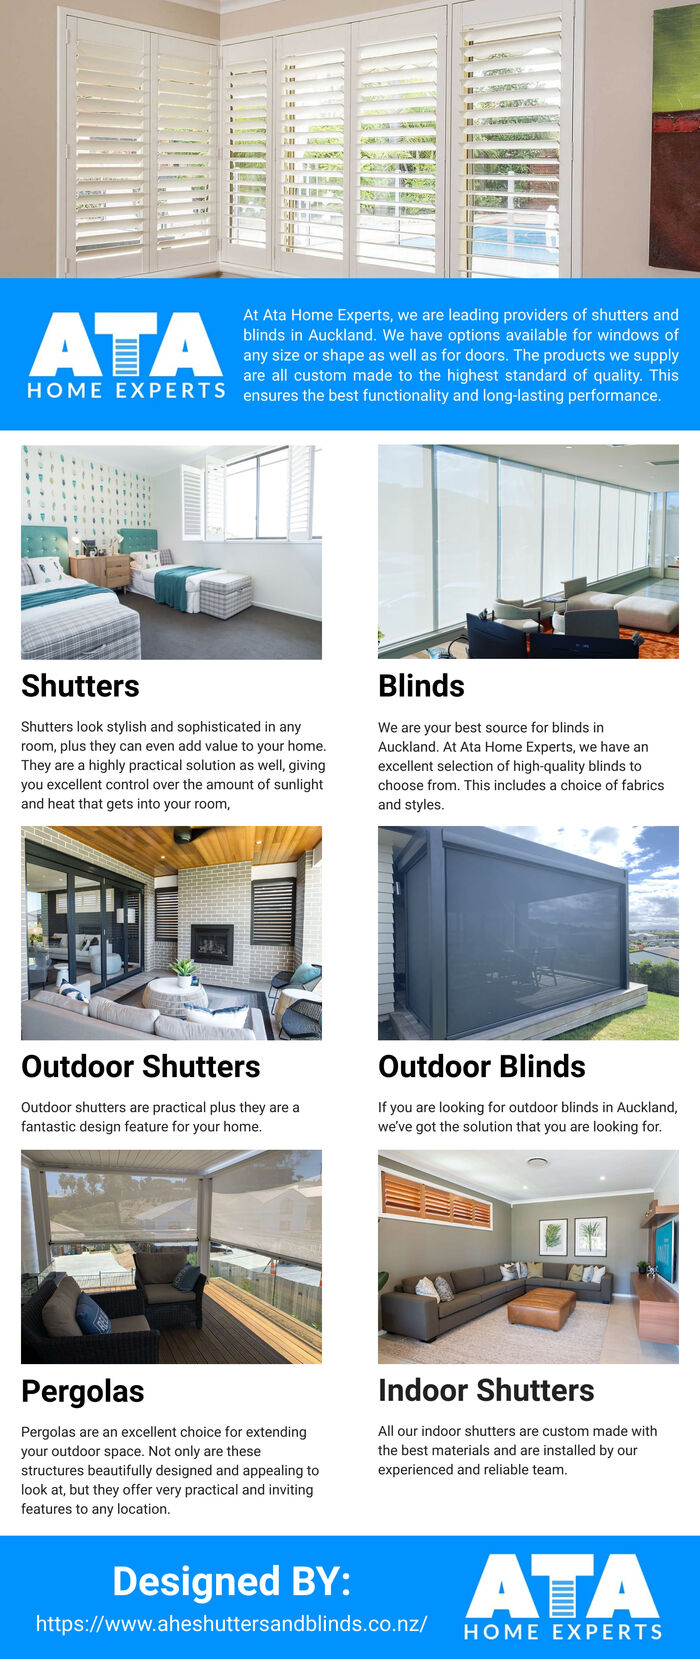 This Infographic is designed by Ahe Shutters and Blinds